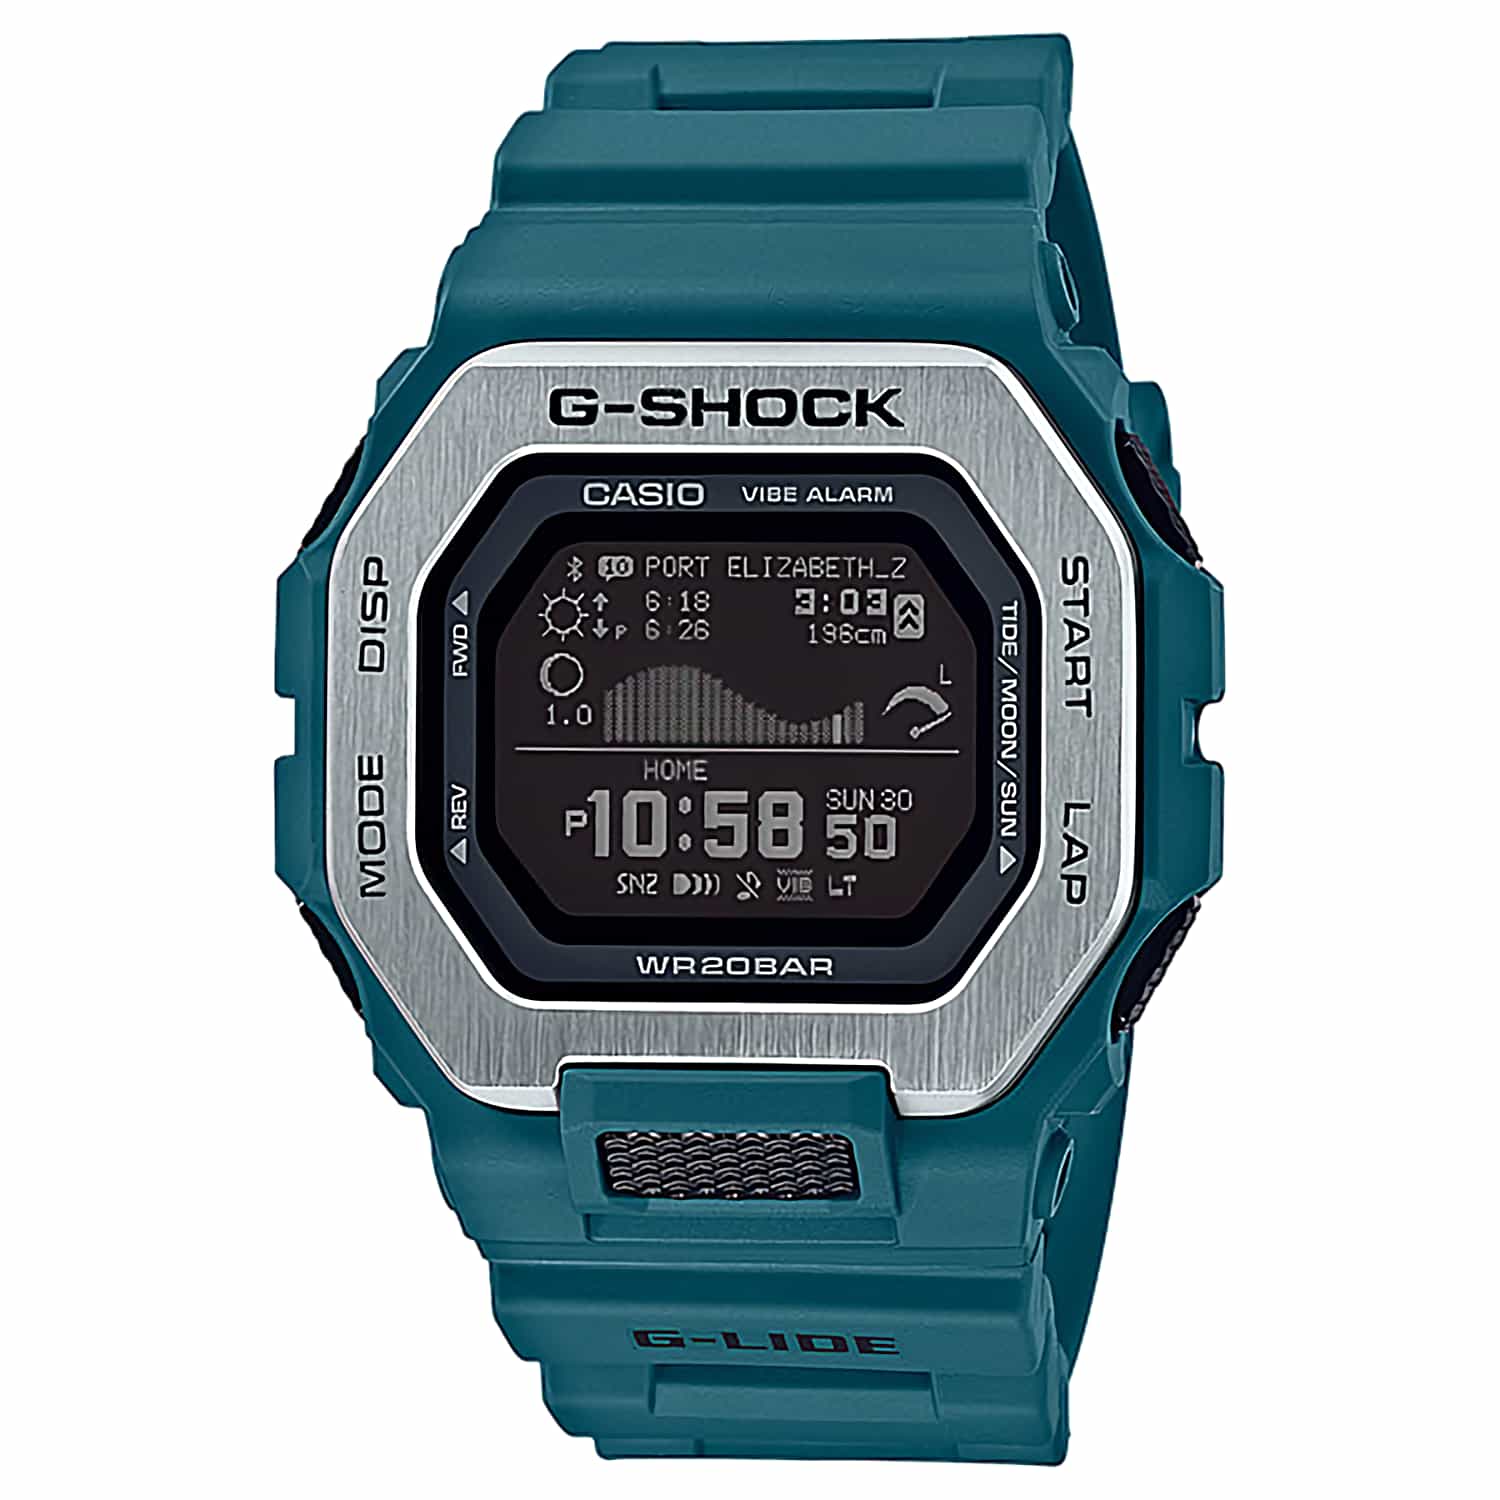 GBX100-2 G-Shock G-LIDE Bluetooth Watch. These new models (May 2020) are the latest additions to the G-LIDE lineup of G-SHOCK sports watches, which are a favourite choice among the worlds top surfers.The  GBX100 models come with the ability to display inf